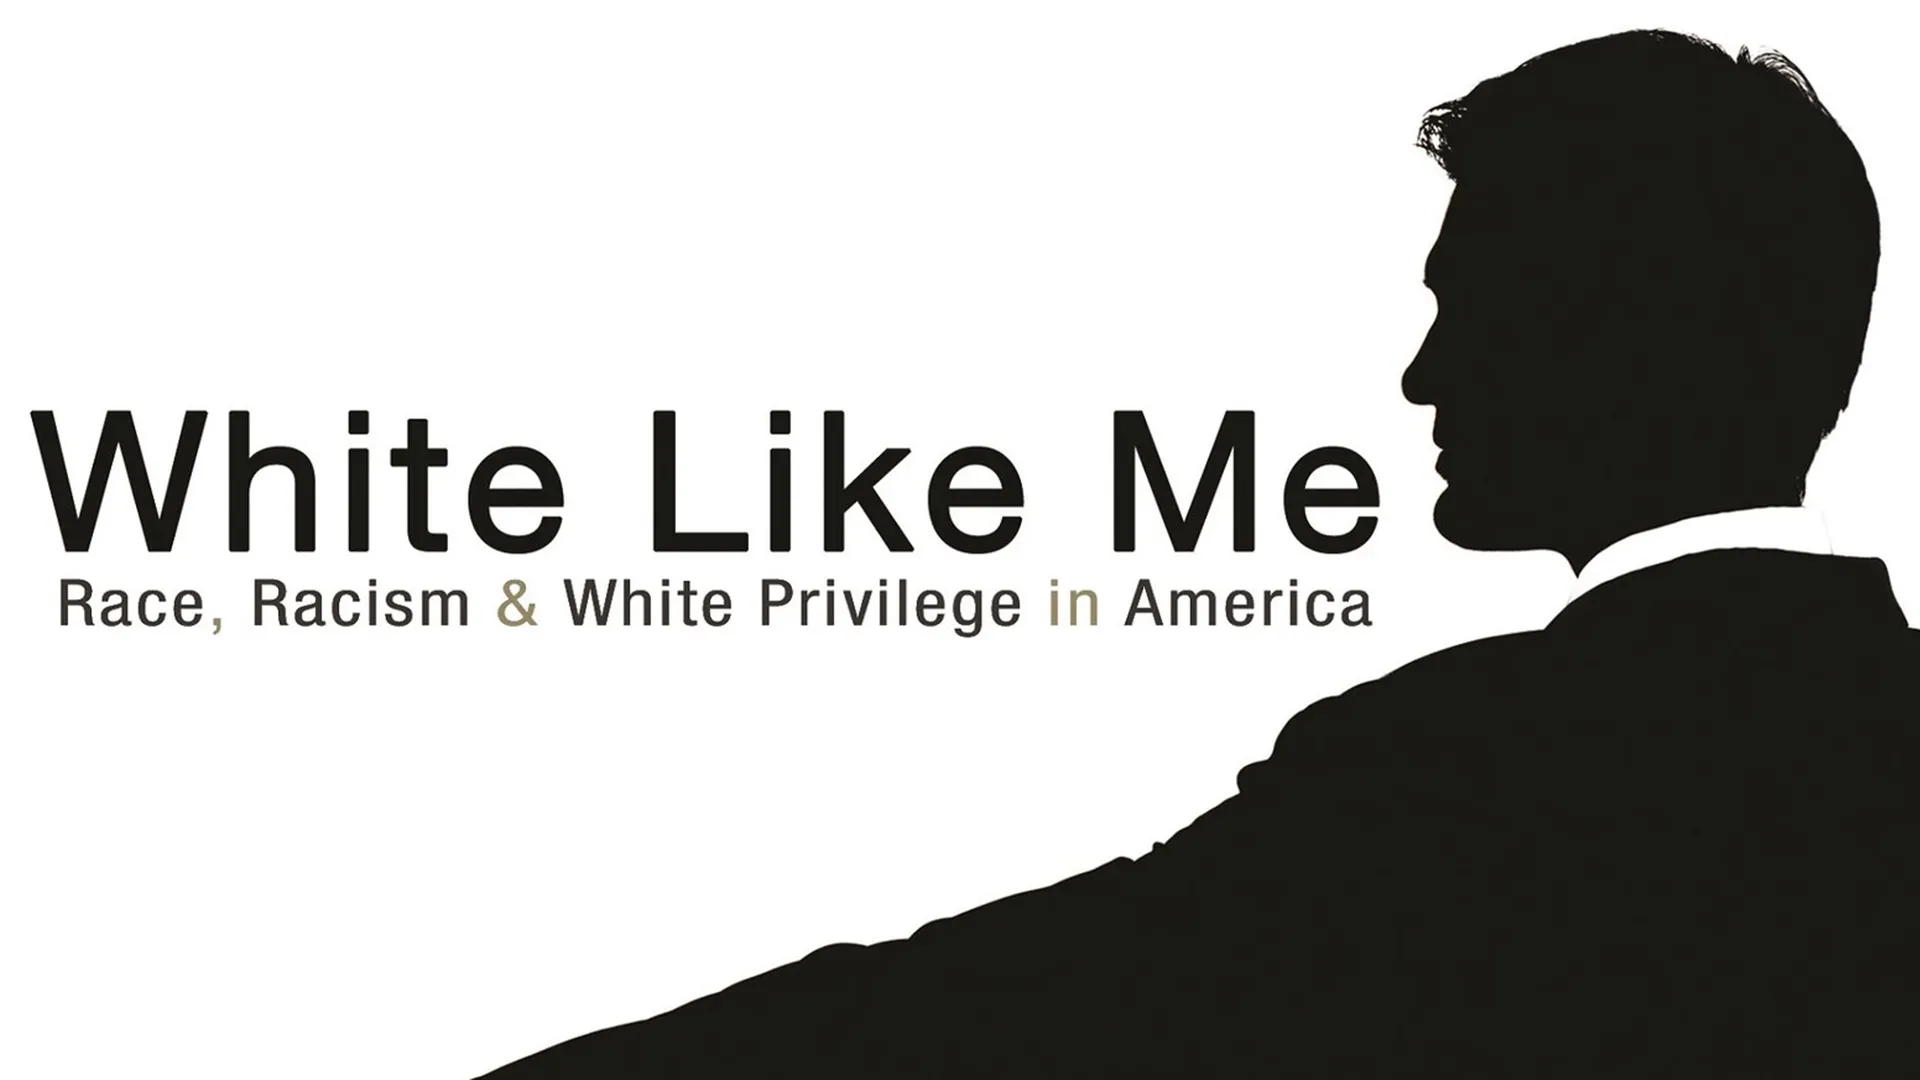 CSUSB’s Conversations on Race and Policing series continues at 4 p.m. Wednesday with a screening of the documentary “White Like Me.”